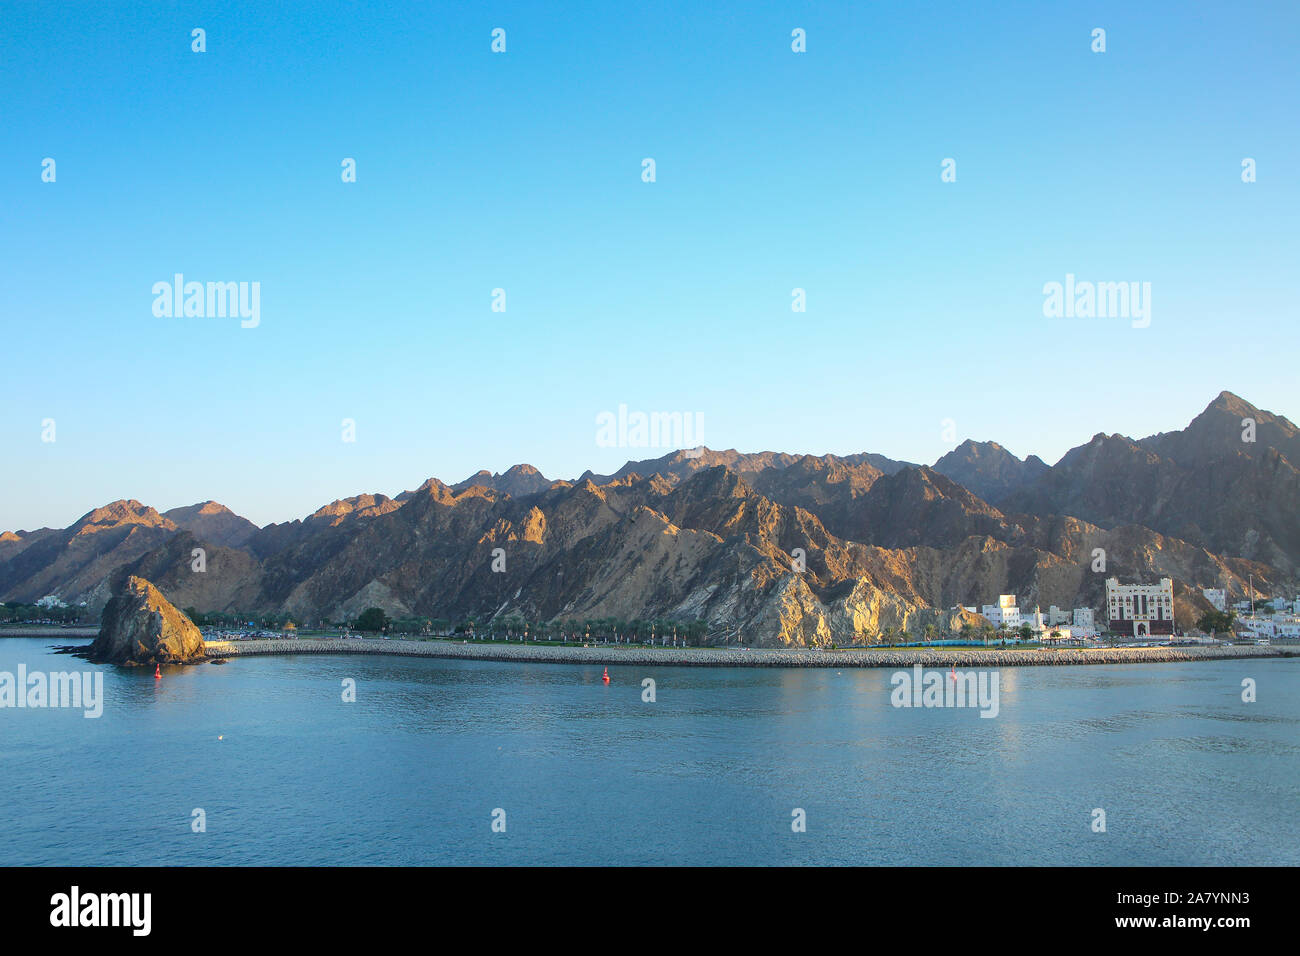 Rocky coastline surrounded by mountains as you approach the city of Muscat, Oman, Middle East. Stock Photo